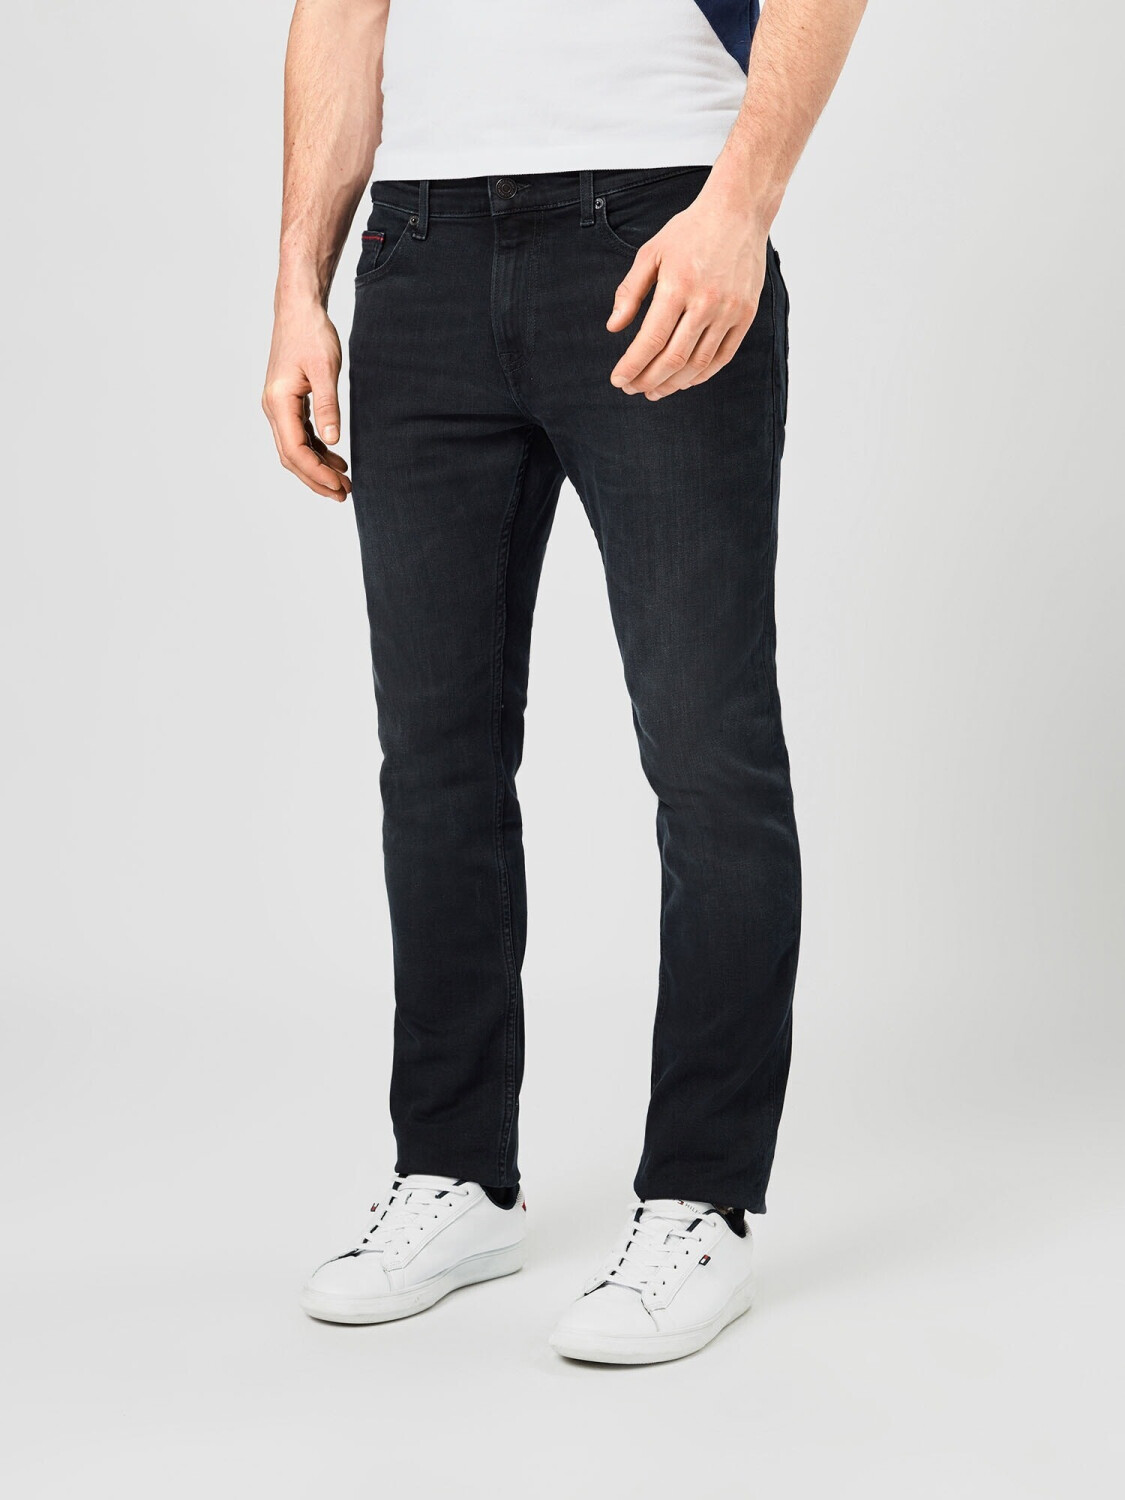 Buy Tommy Scanton Slim Fit Black Faded dynamic jacob black from £56.62 (Today) – Best Deals on idealo.co.uk